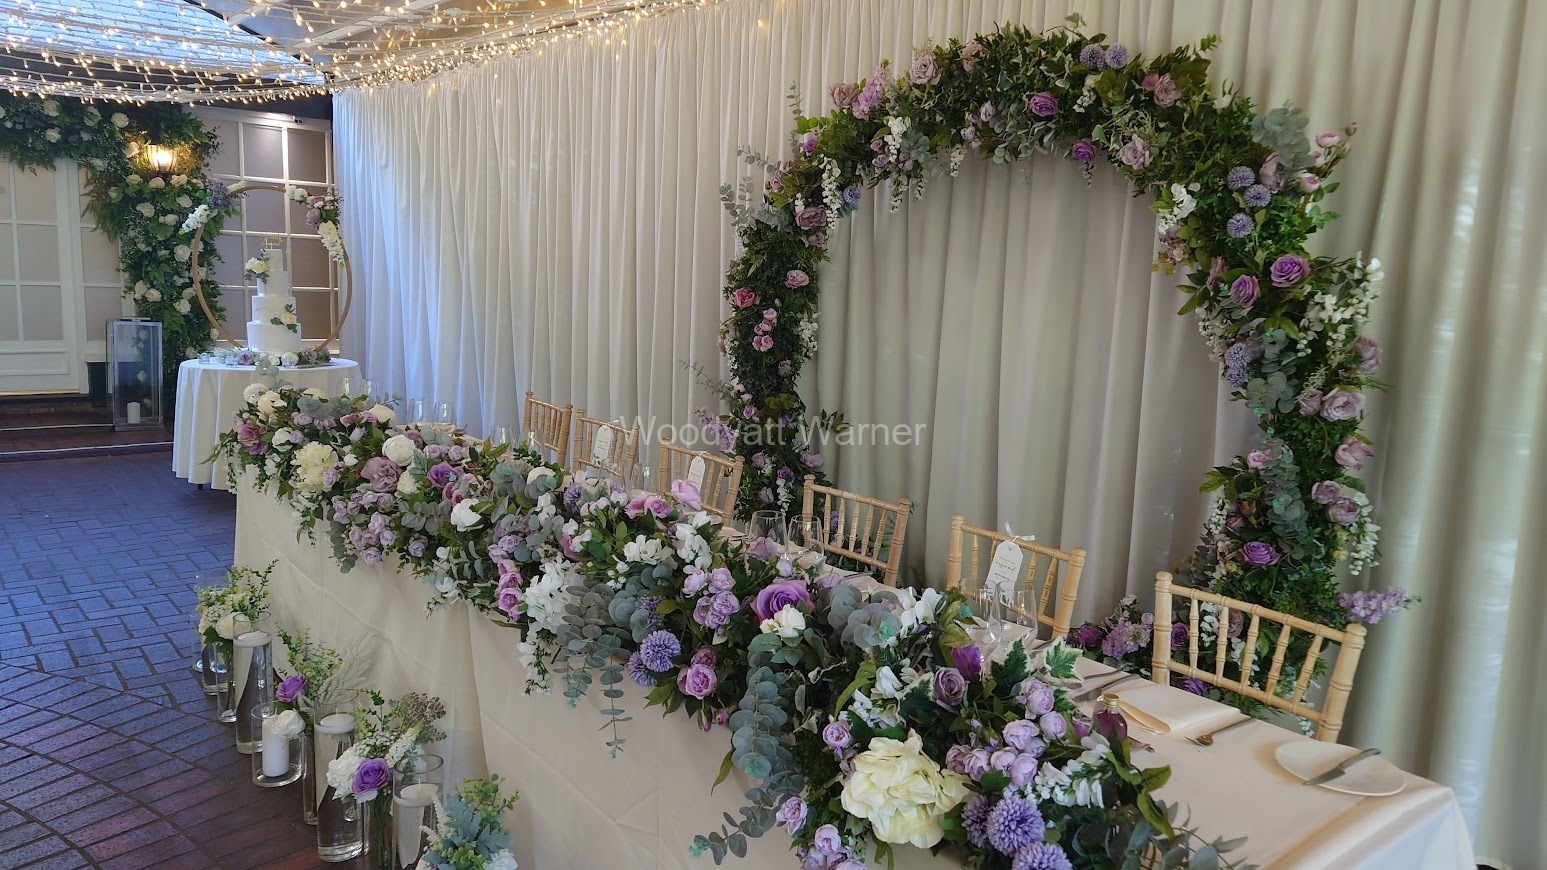 Floral hoop and top table